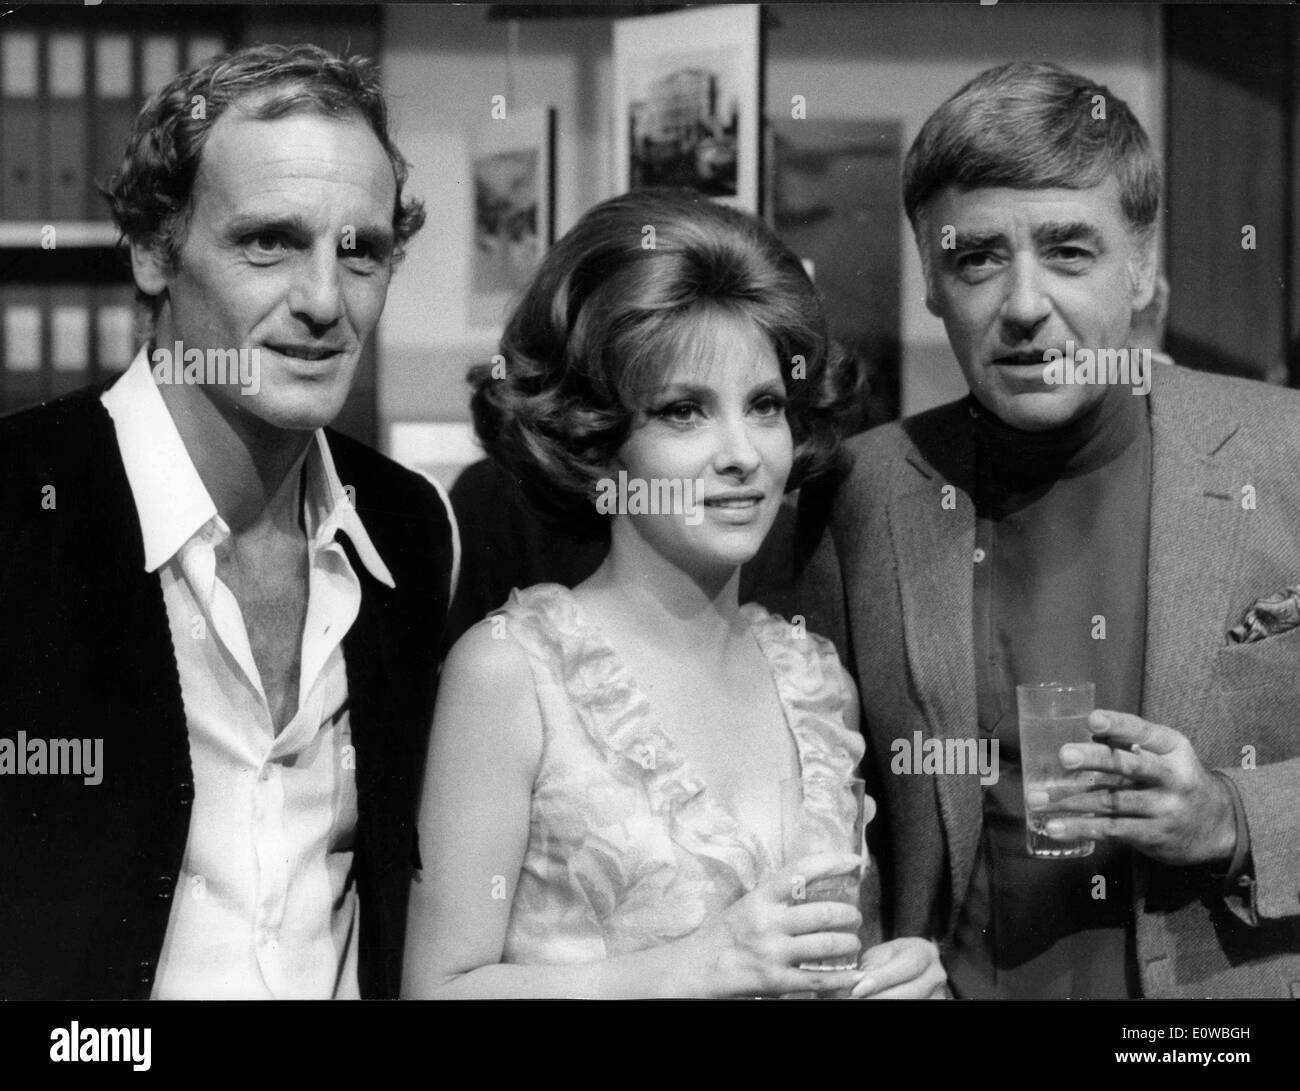 Actor Peter Lawford with co-stars Stock Photo